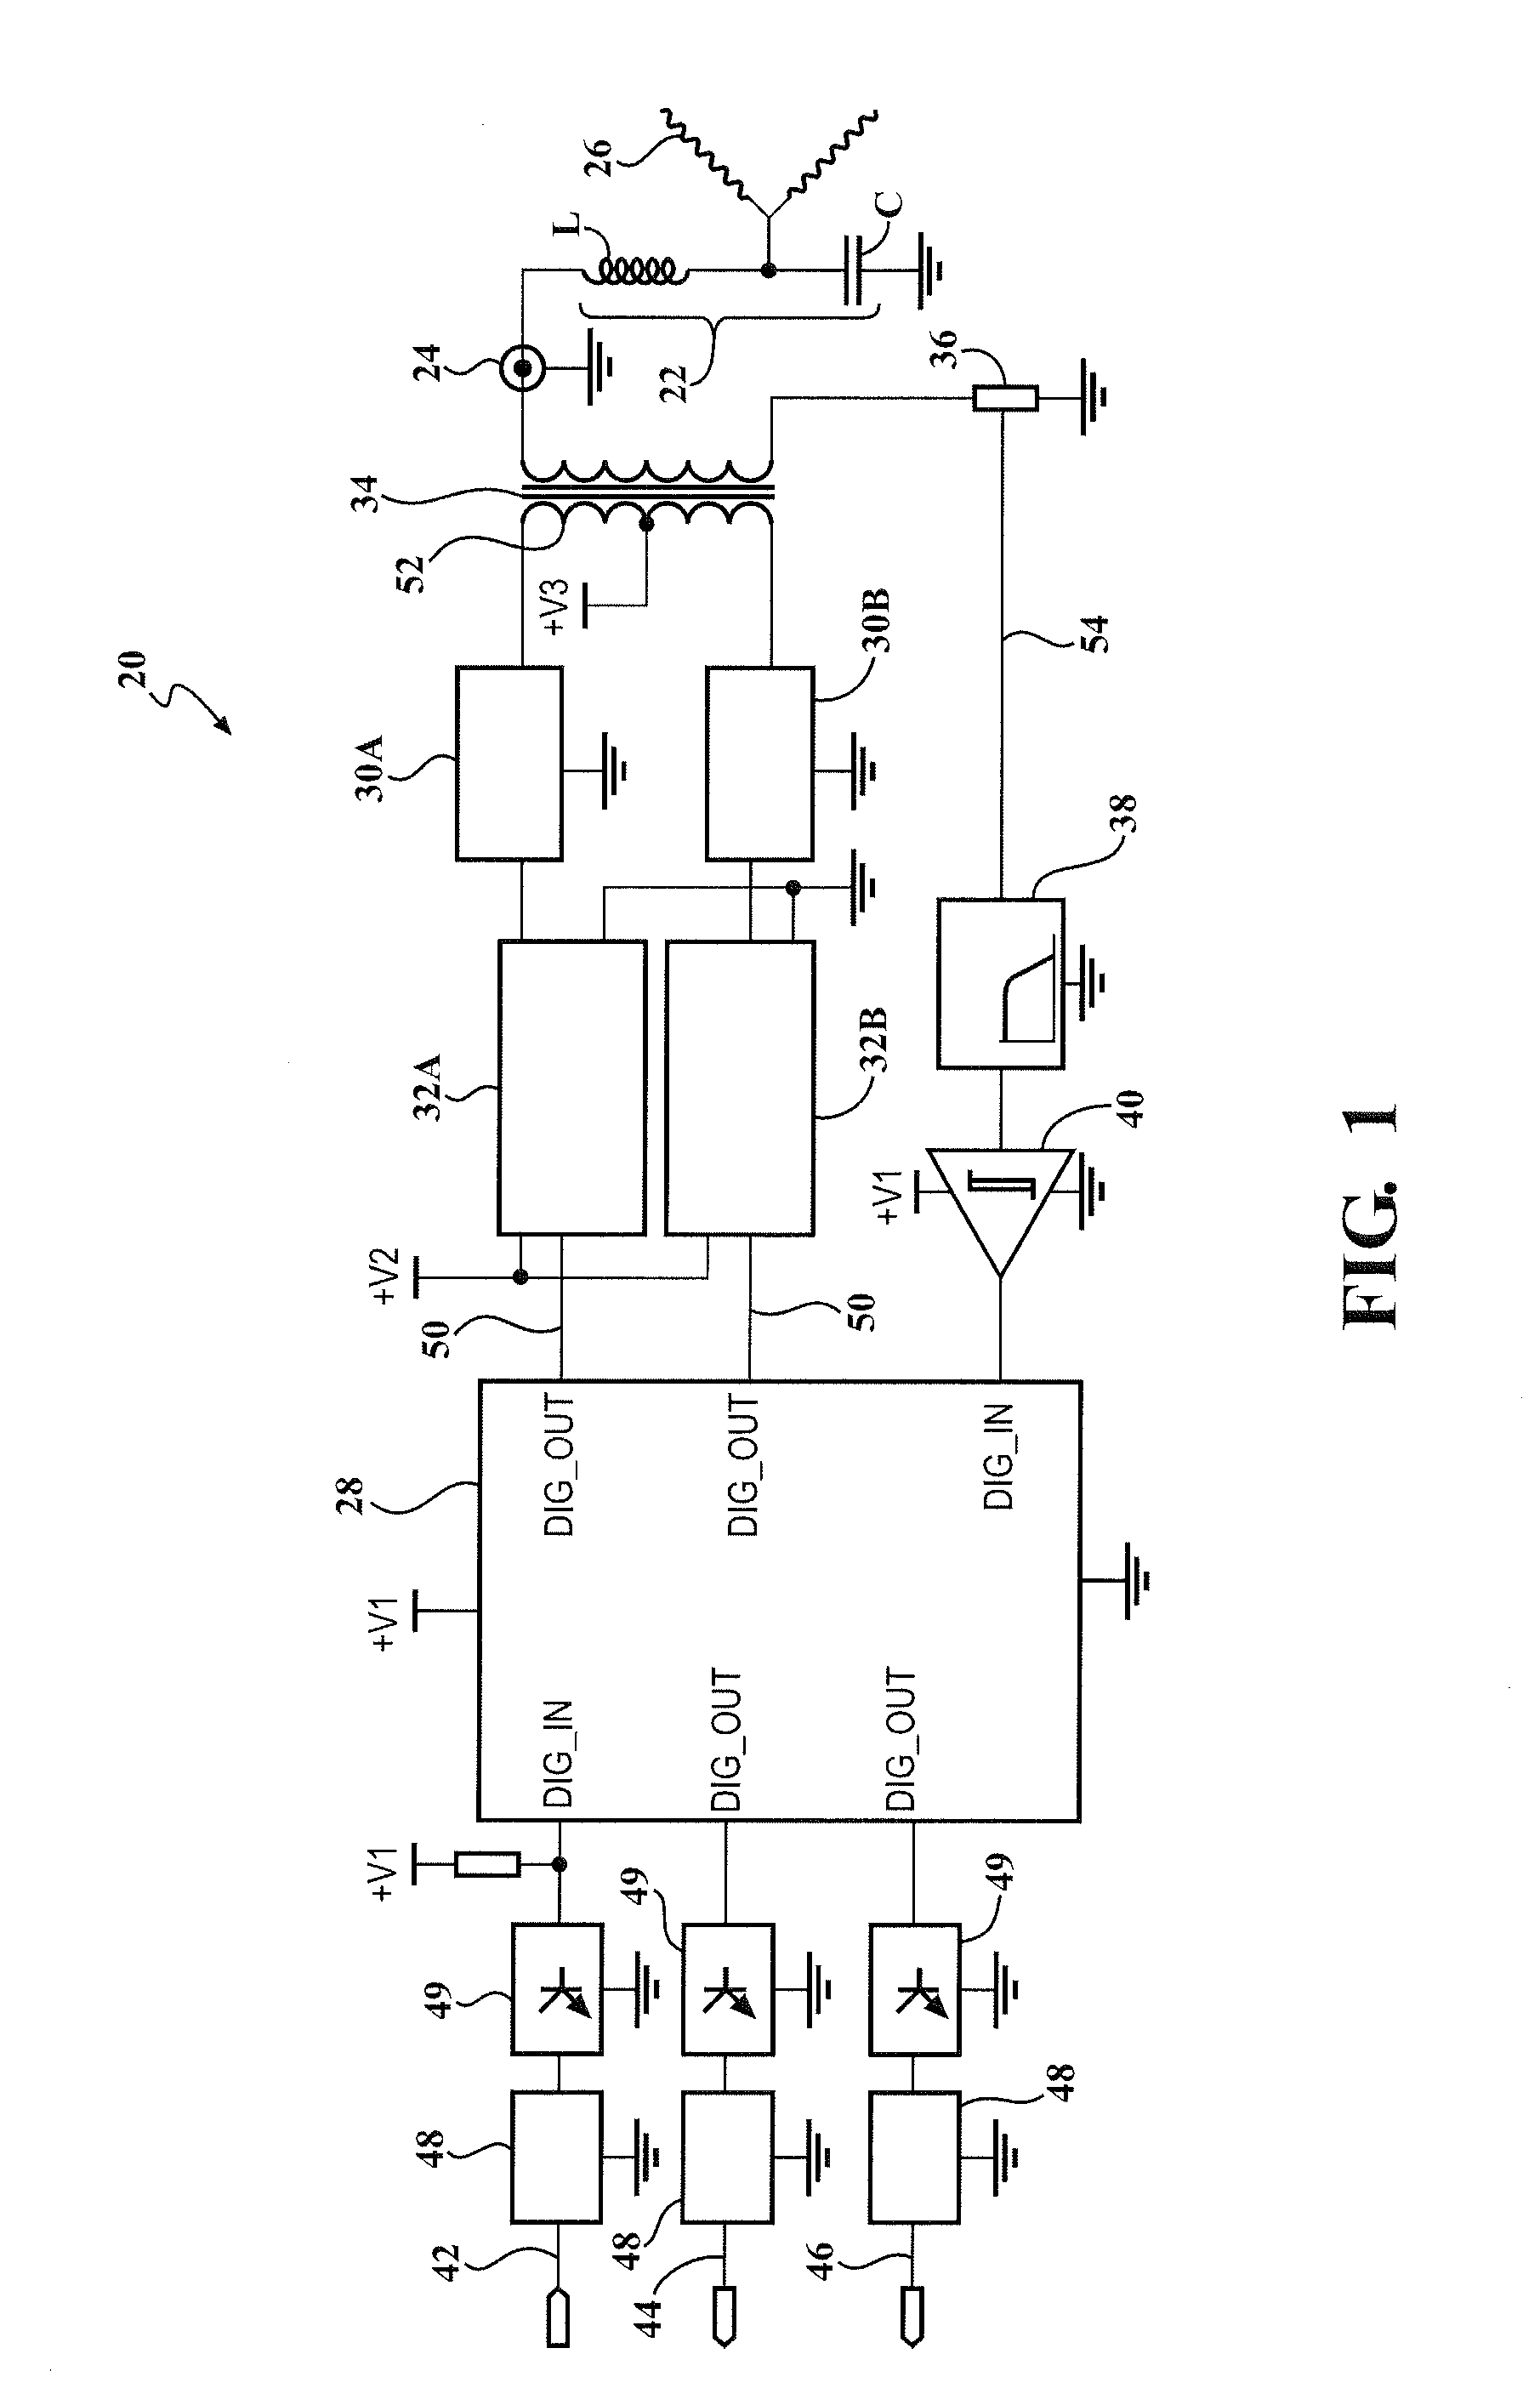 Flexible control system for corona ignition power supply